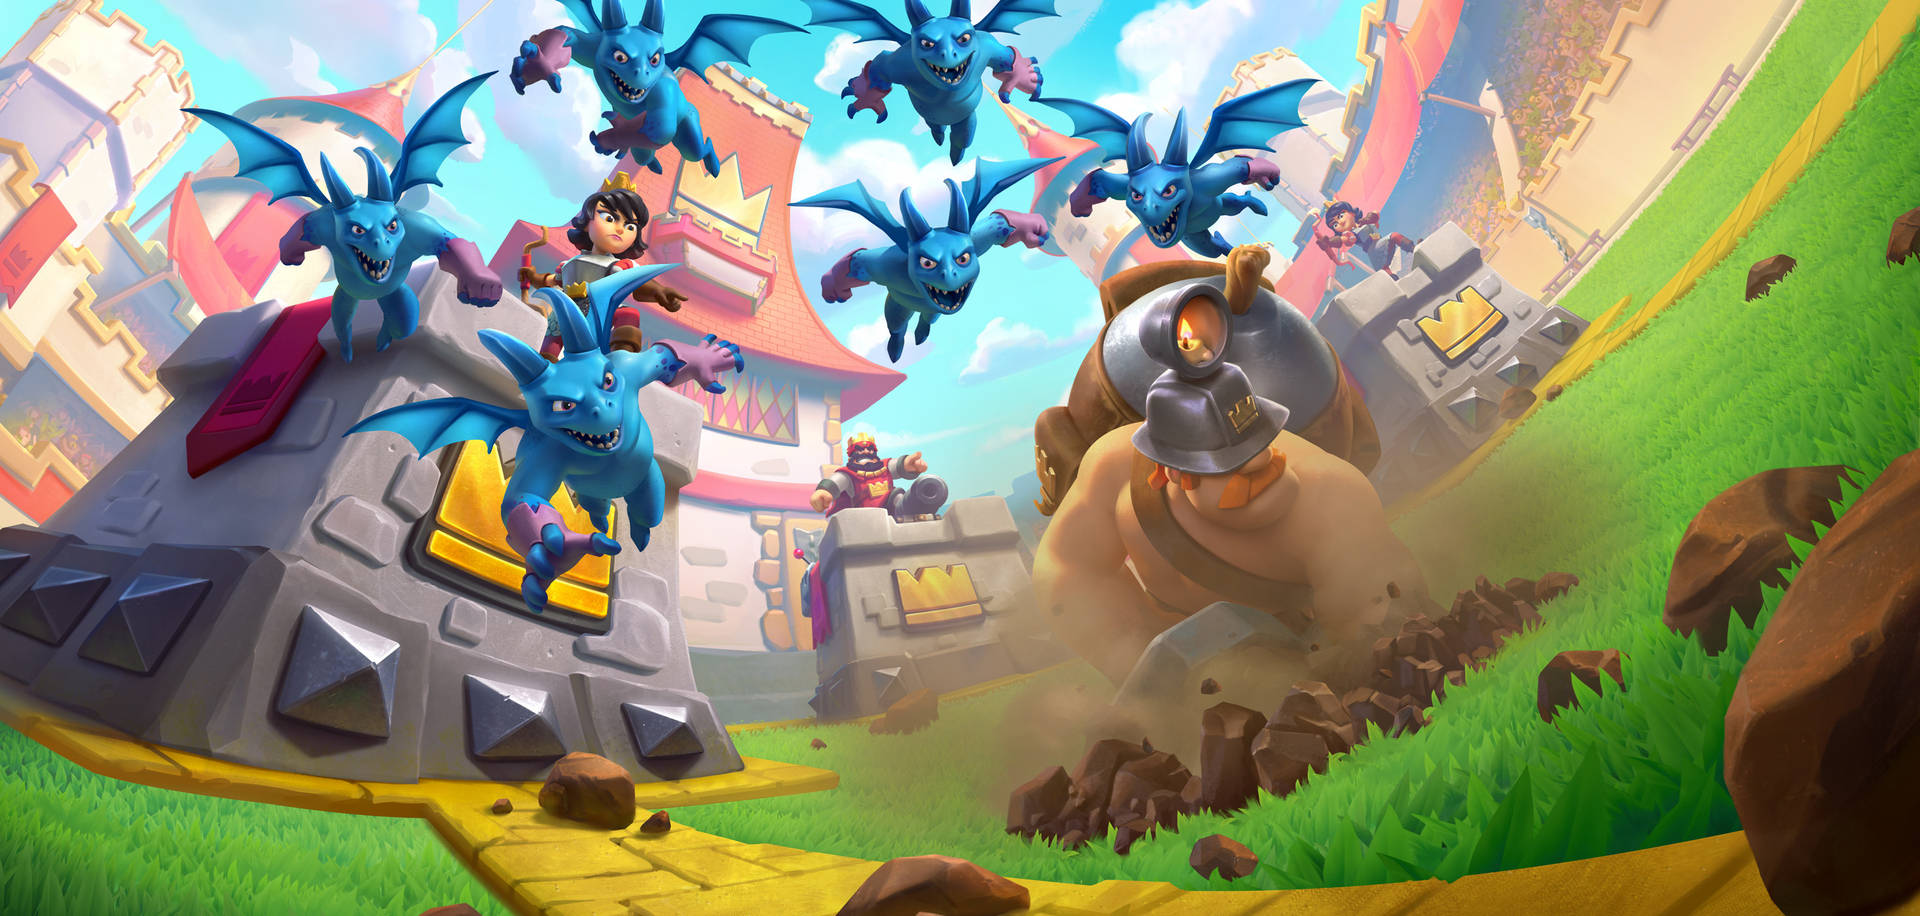 Wallpaper Of Minions And The Mighty Miner From The Clash Royale Phone Game Background